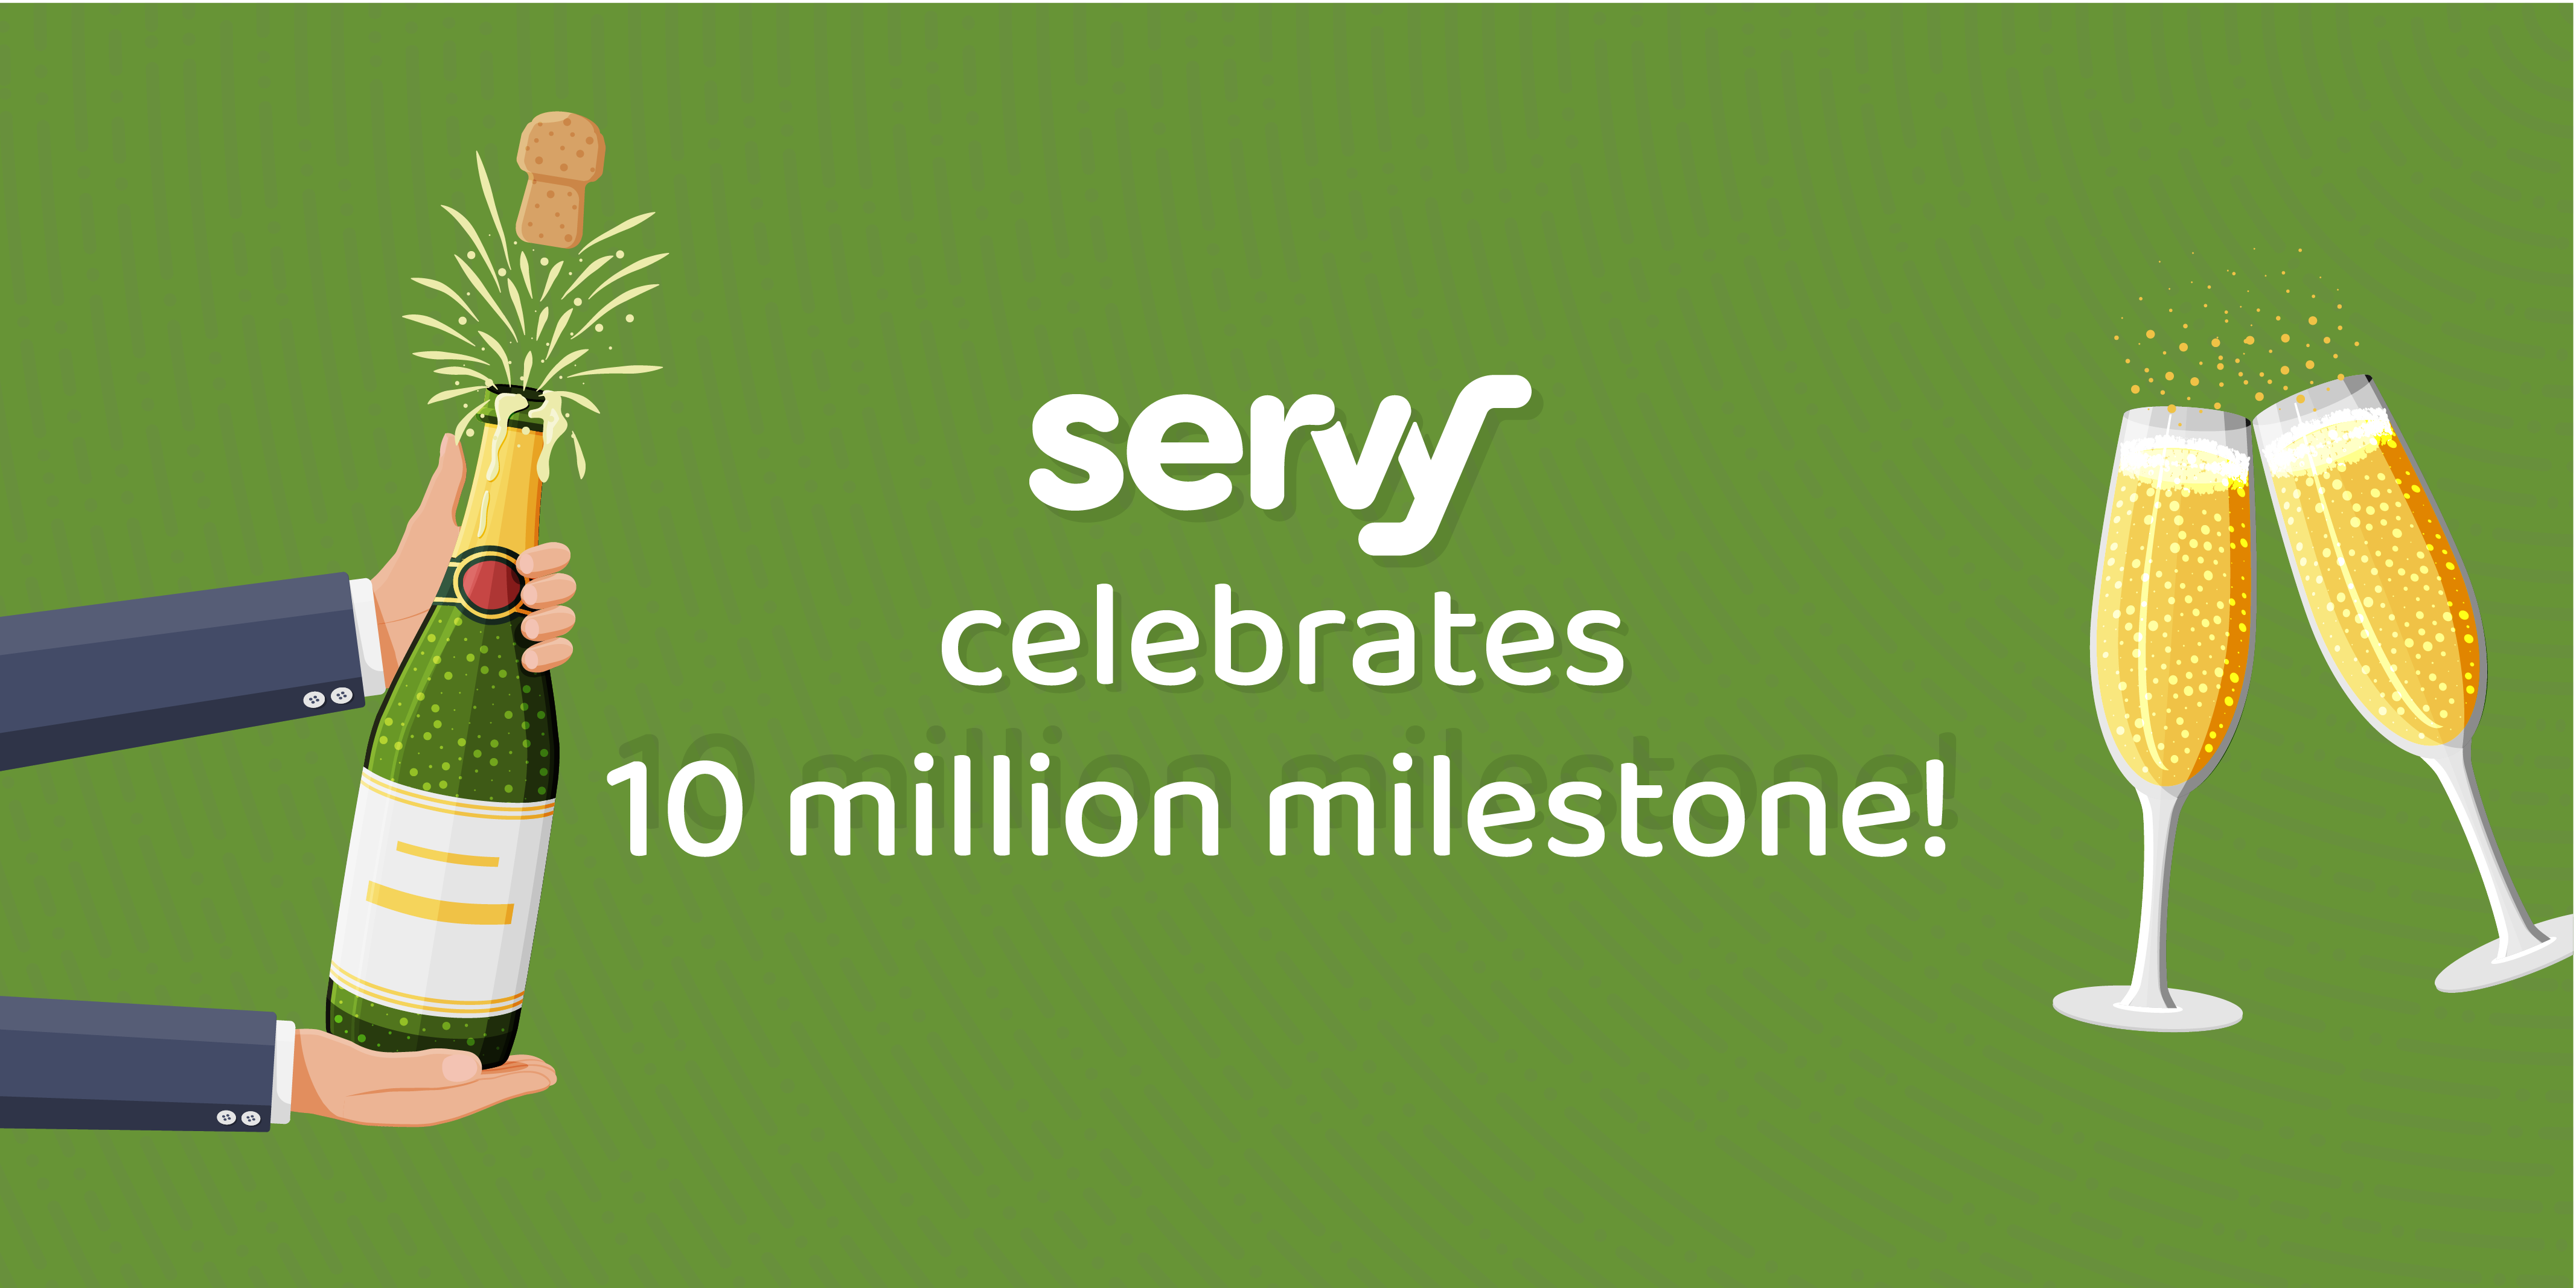 Servy doubles digital orders to 10 million in just 12 months; announces launch of Servy Insights+ AI engine